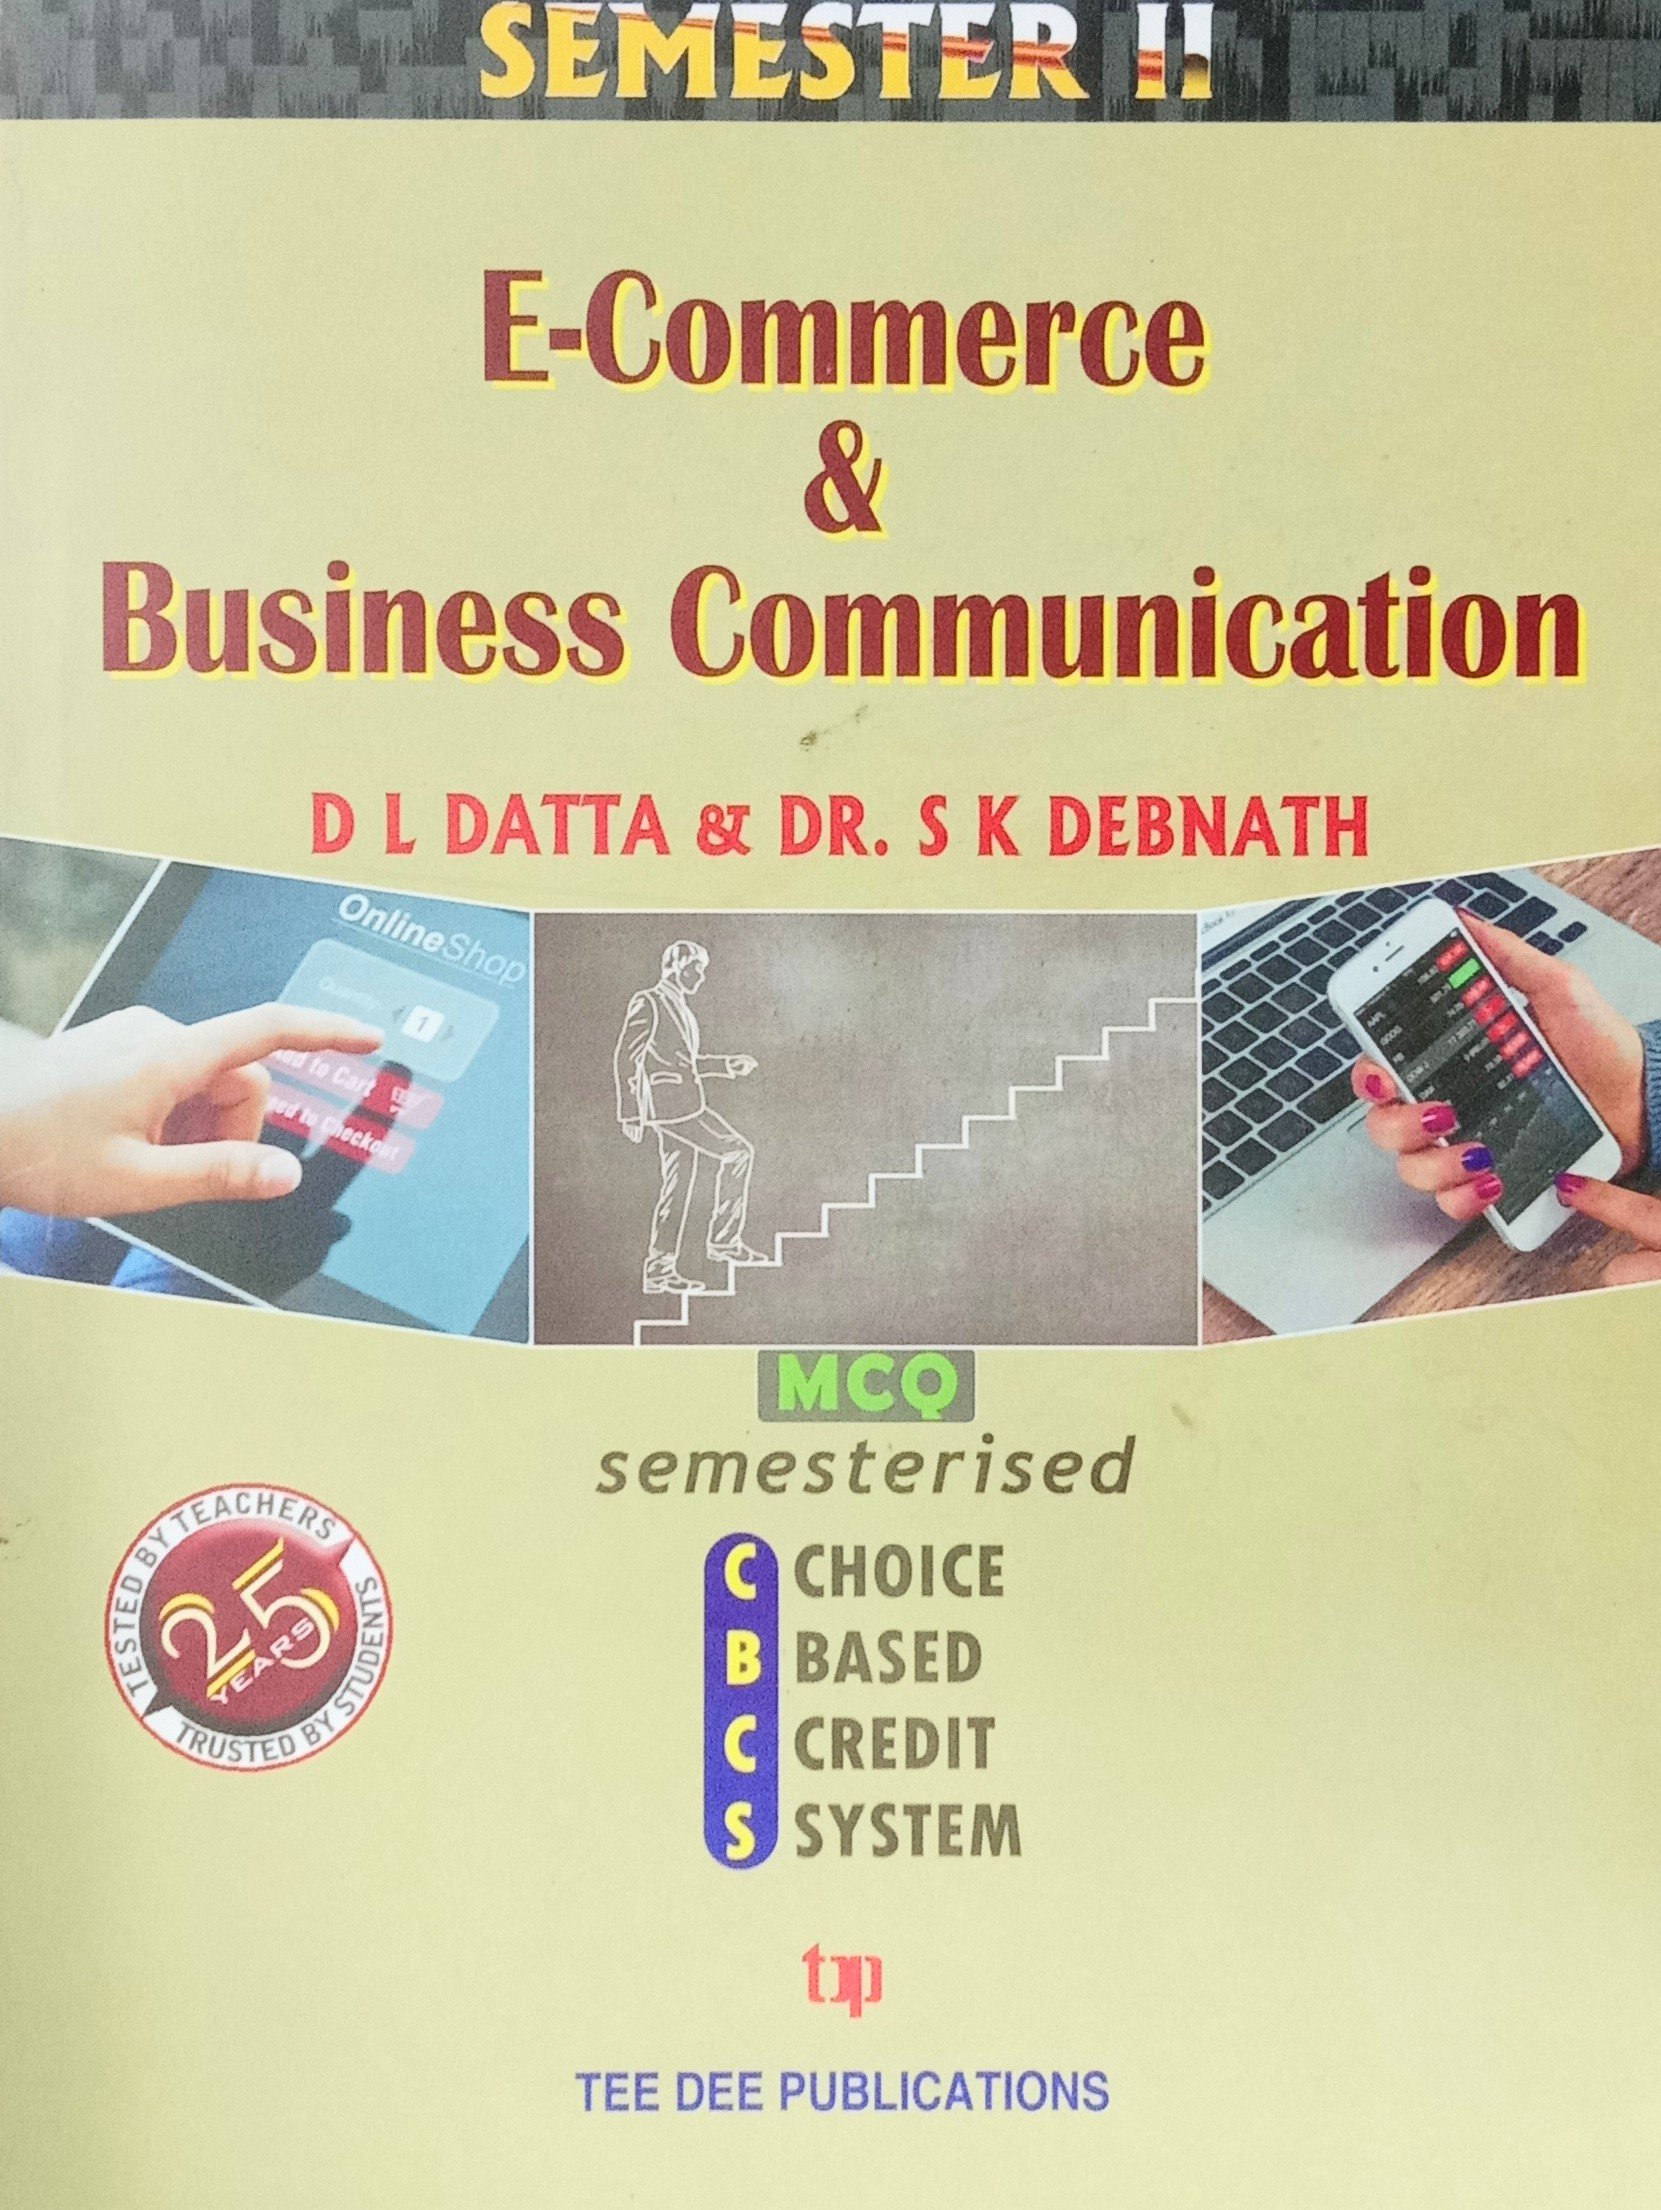 E Commerce And Business Communication By DL DATTA  And DR S K DEBNATH  B com